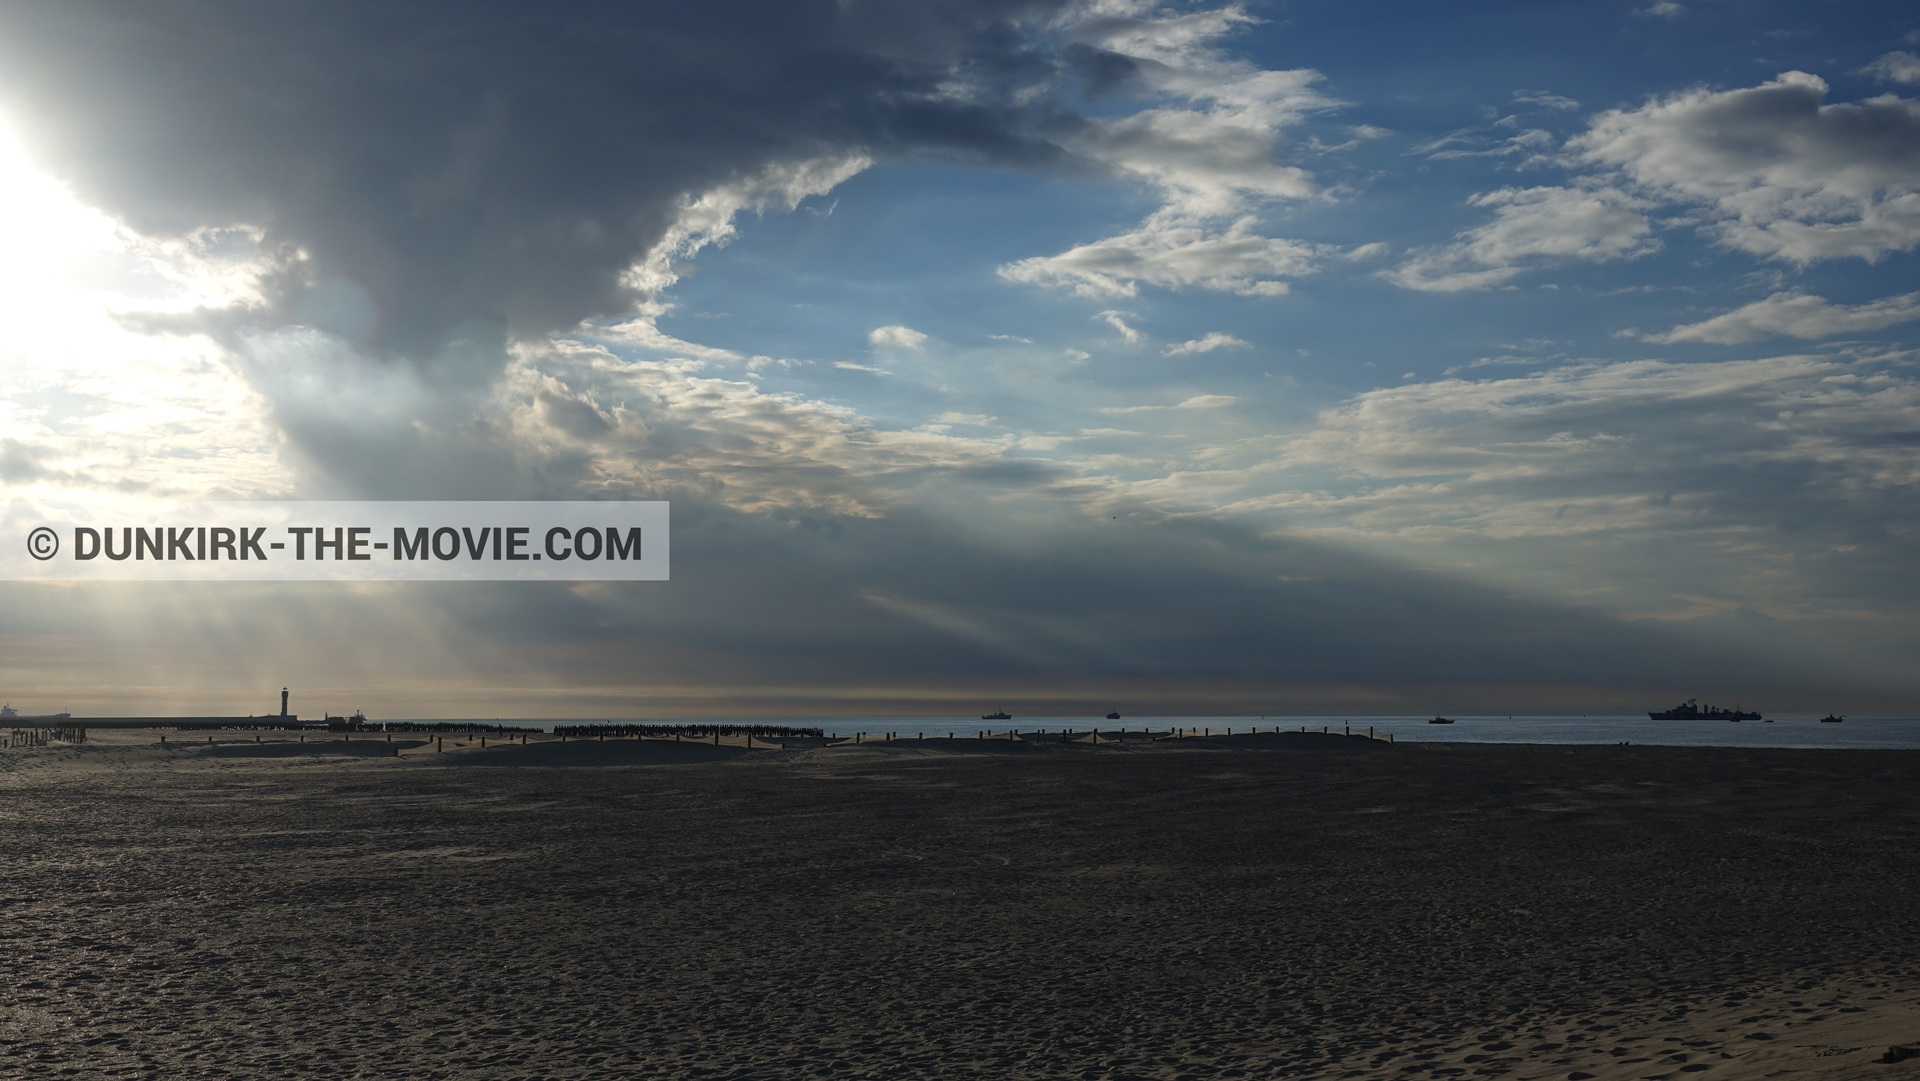 Picture with boat, cloudy sky, St Pol sur Mer lighthouse, beach,  from behind the scene of the Dunkirk movie by Nolan